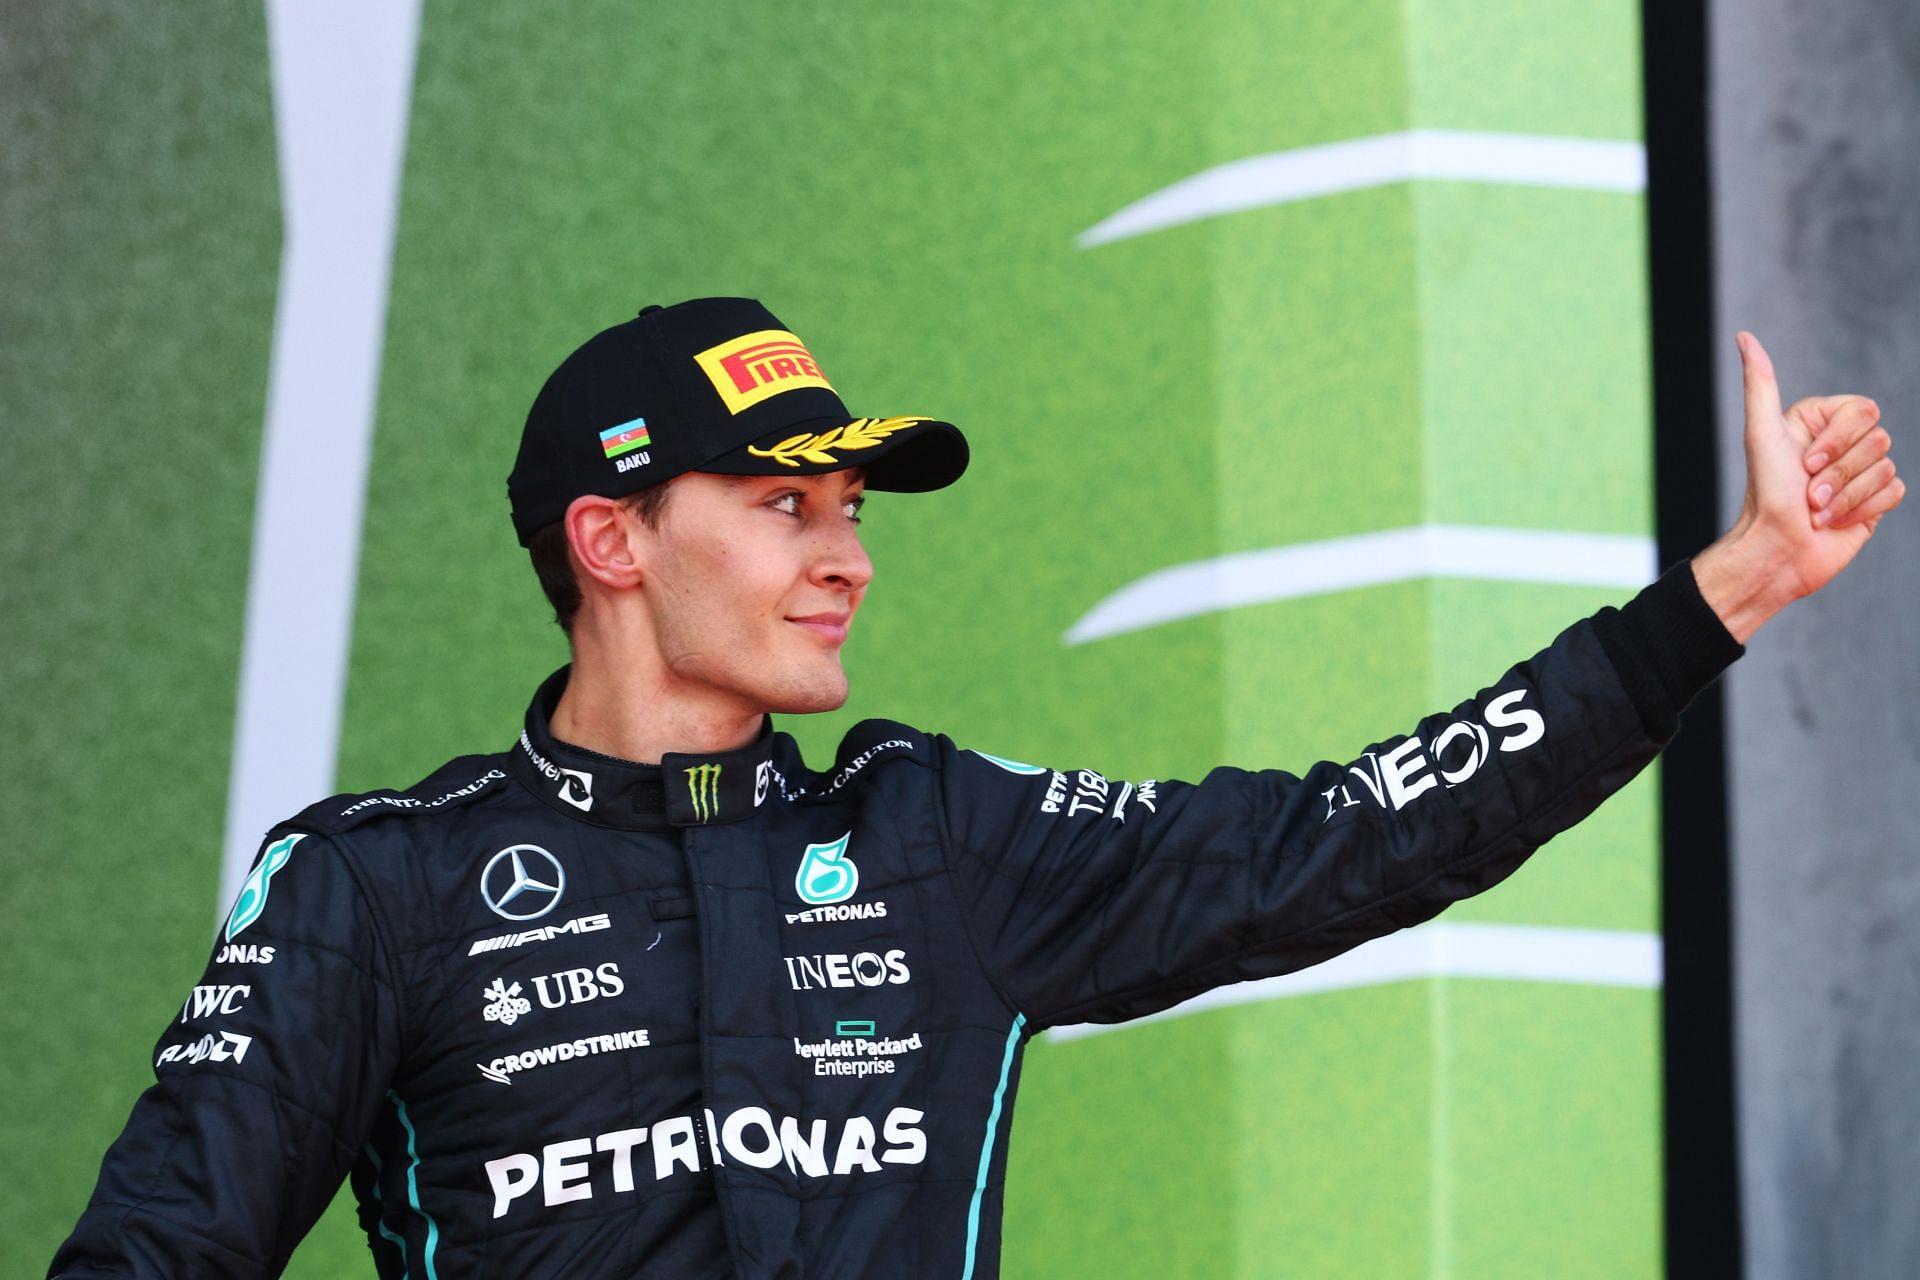 George Russell celebrates on the podium during the F1 Grand Prix of Azerbaijan at Baku City Circuit on June 12, 2022 in Baku, Azerbaijan. (Photo by Clive Rose/Getty Images)